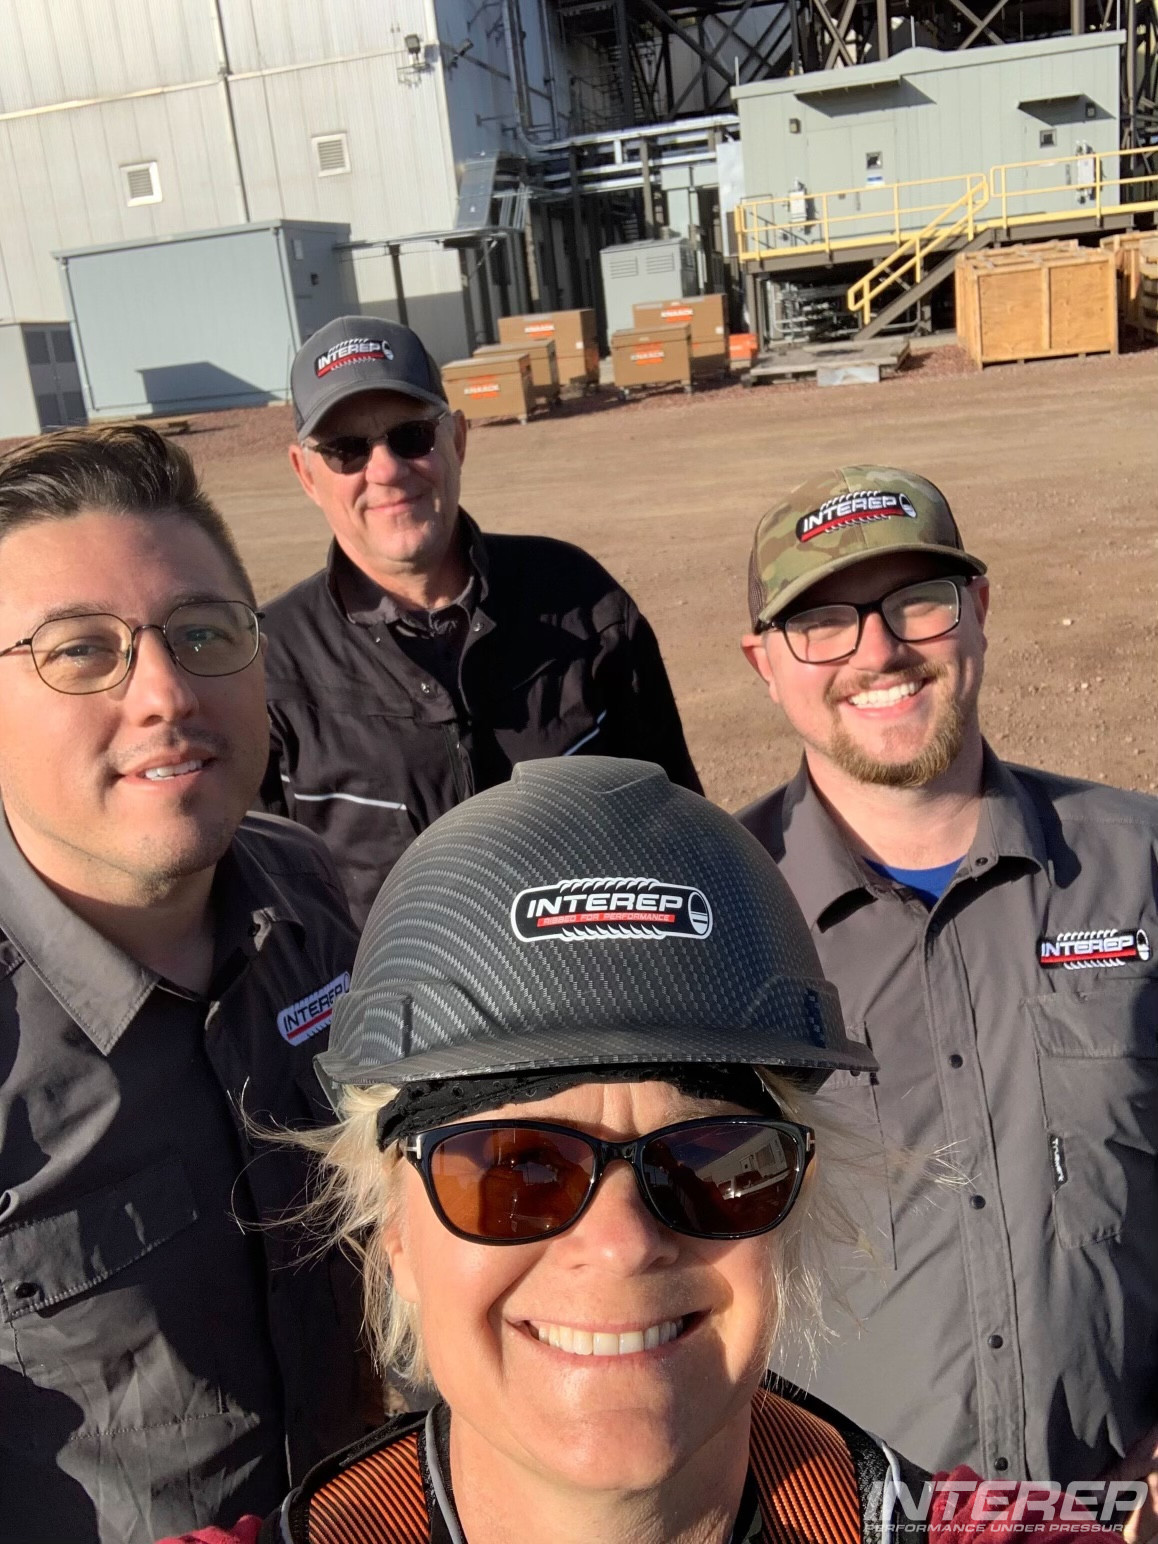 Smile, it’s almost Friday! 😆🛠👷🏼‍♀️ Even weekends won’t keep us from making sure you stay online. Give us a call! #performanceunderpressure #therewhenyouneedit